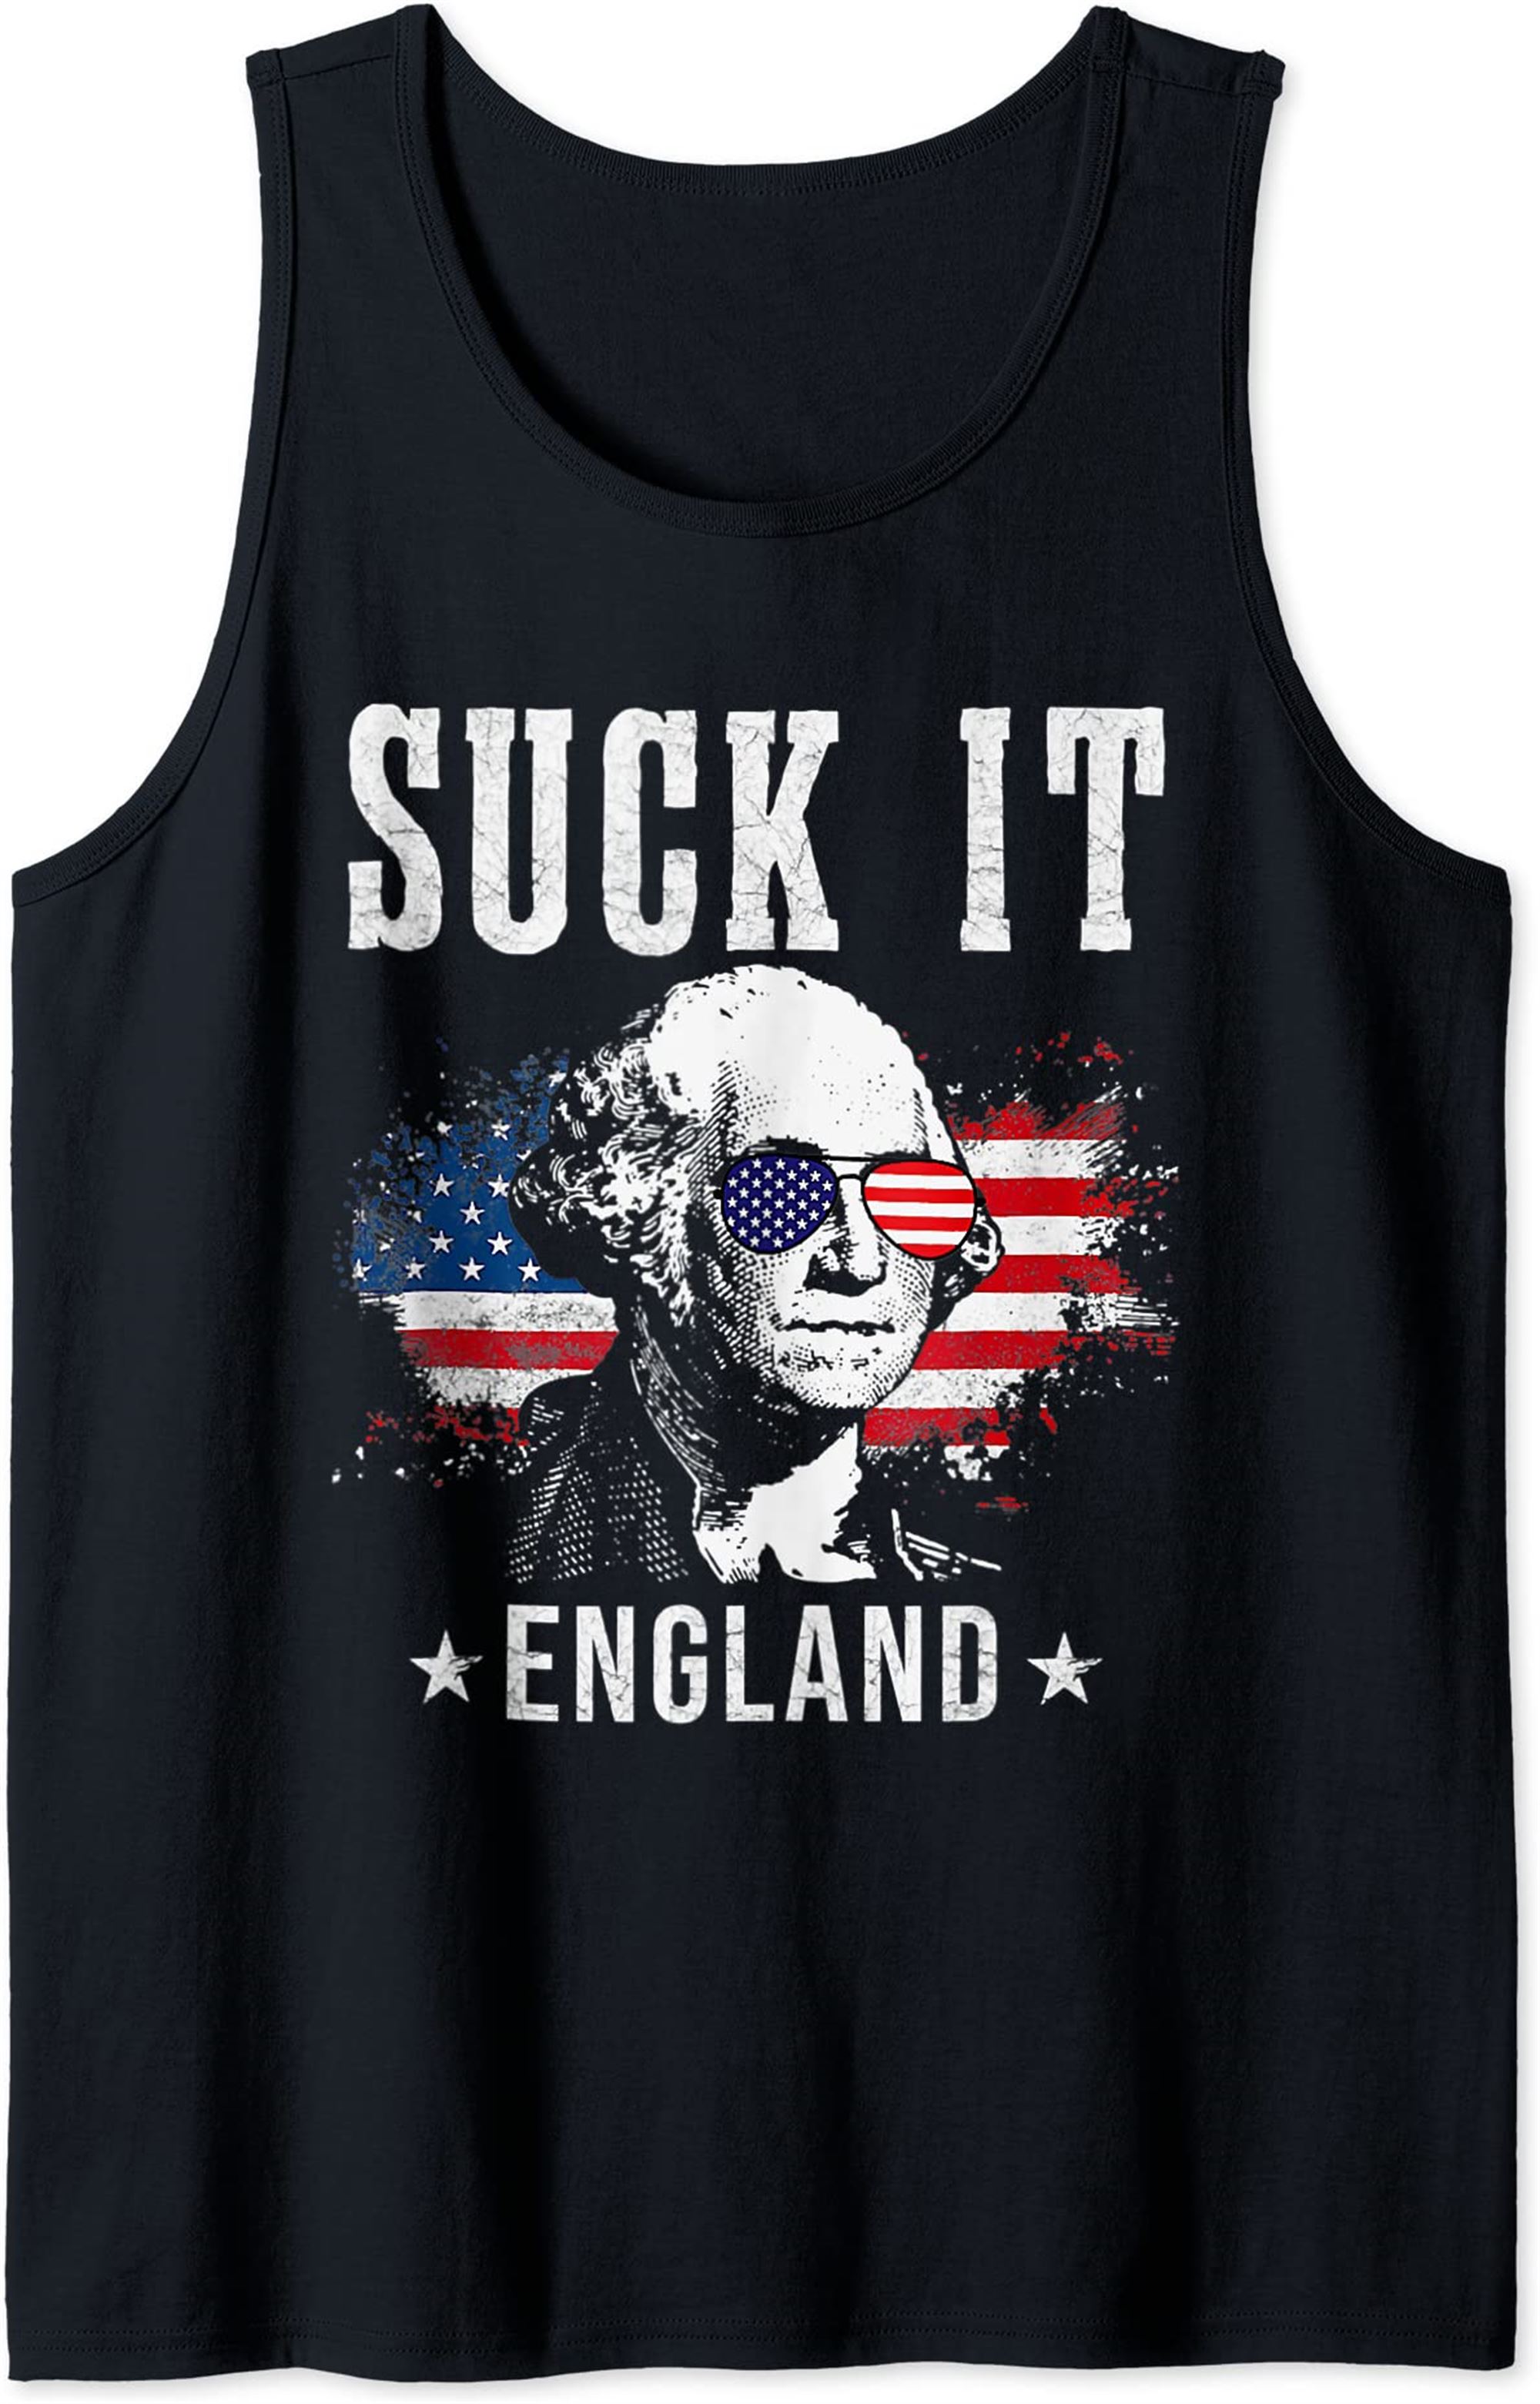 Suck It England Funny 4th Of July President American Tank Top Plus Size Up To 5xl